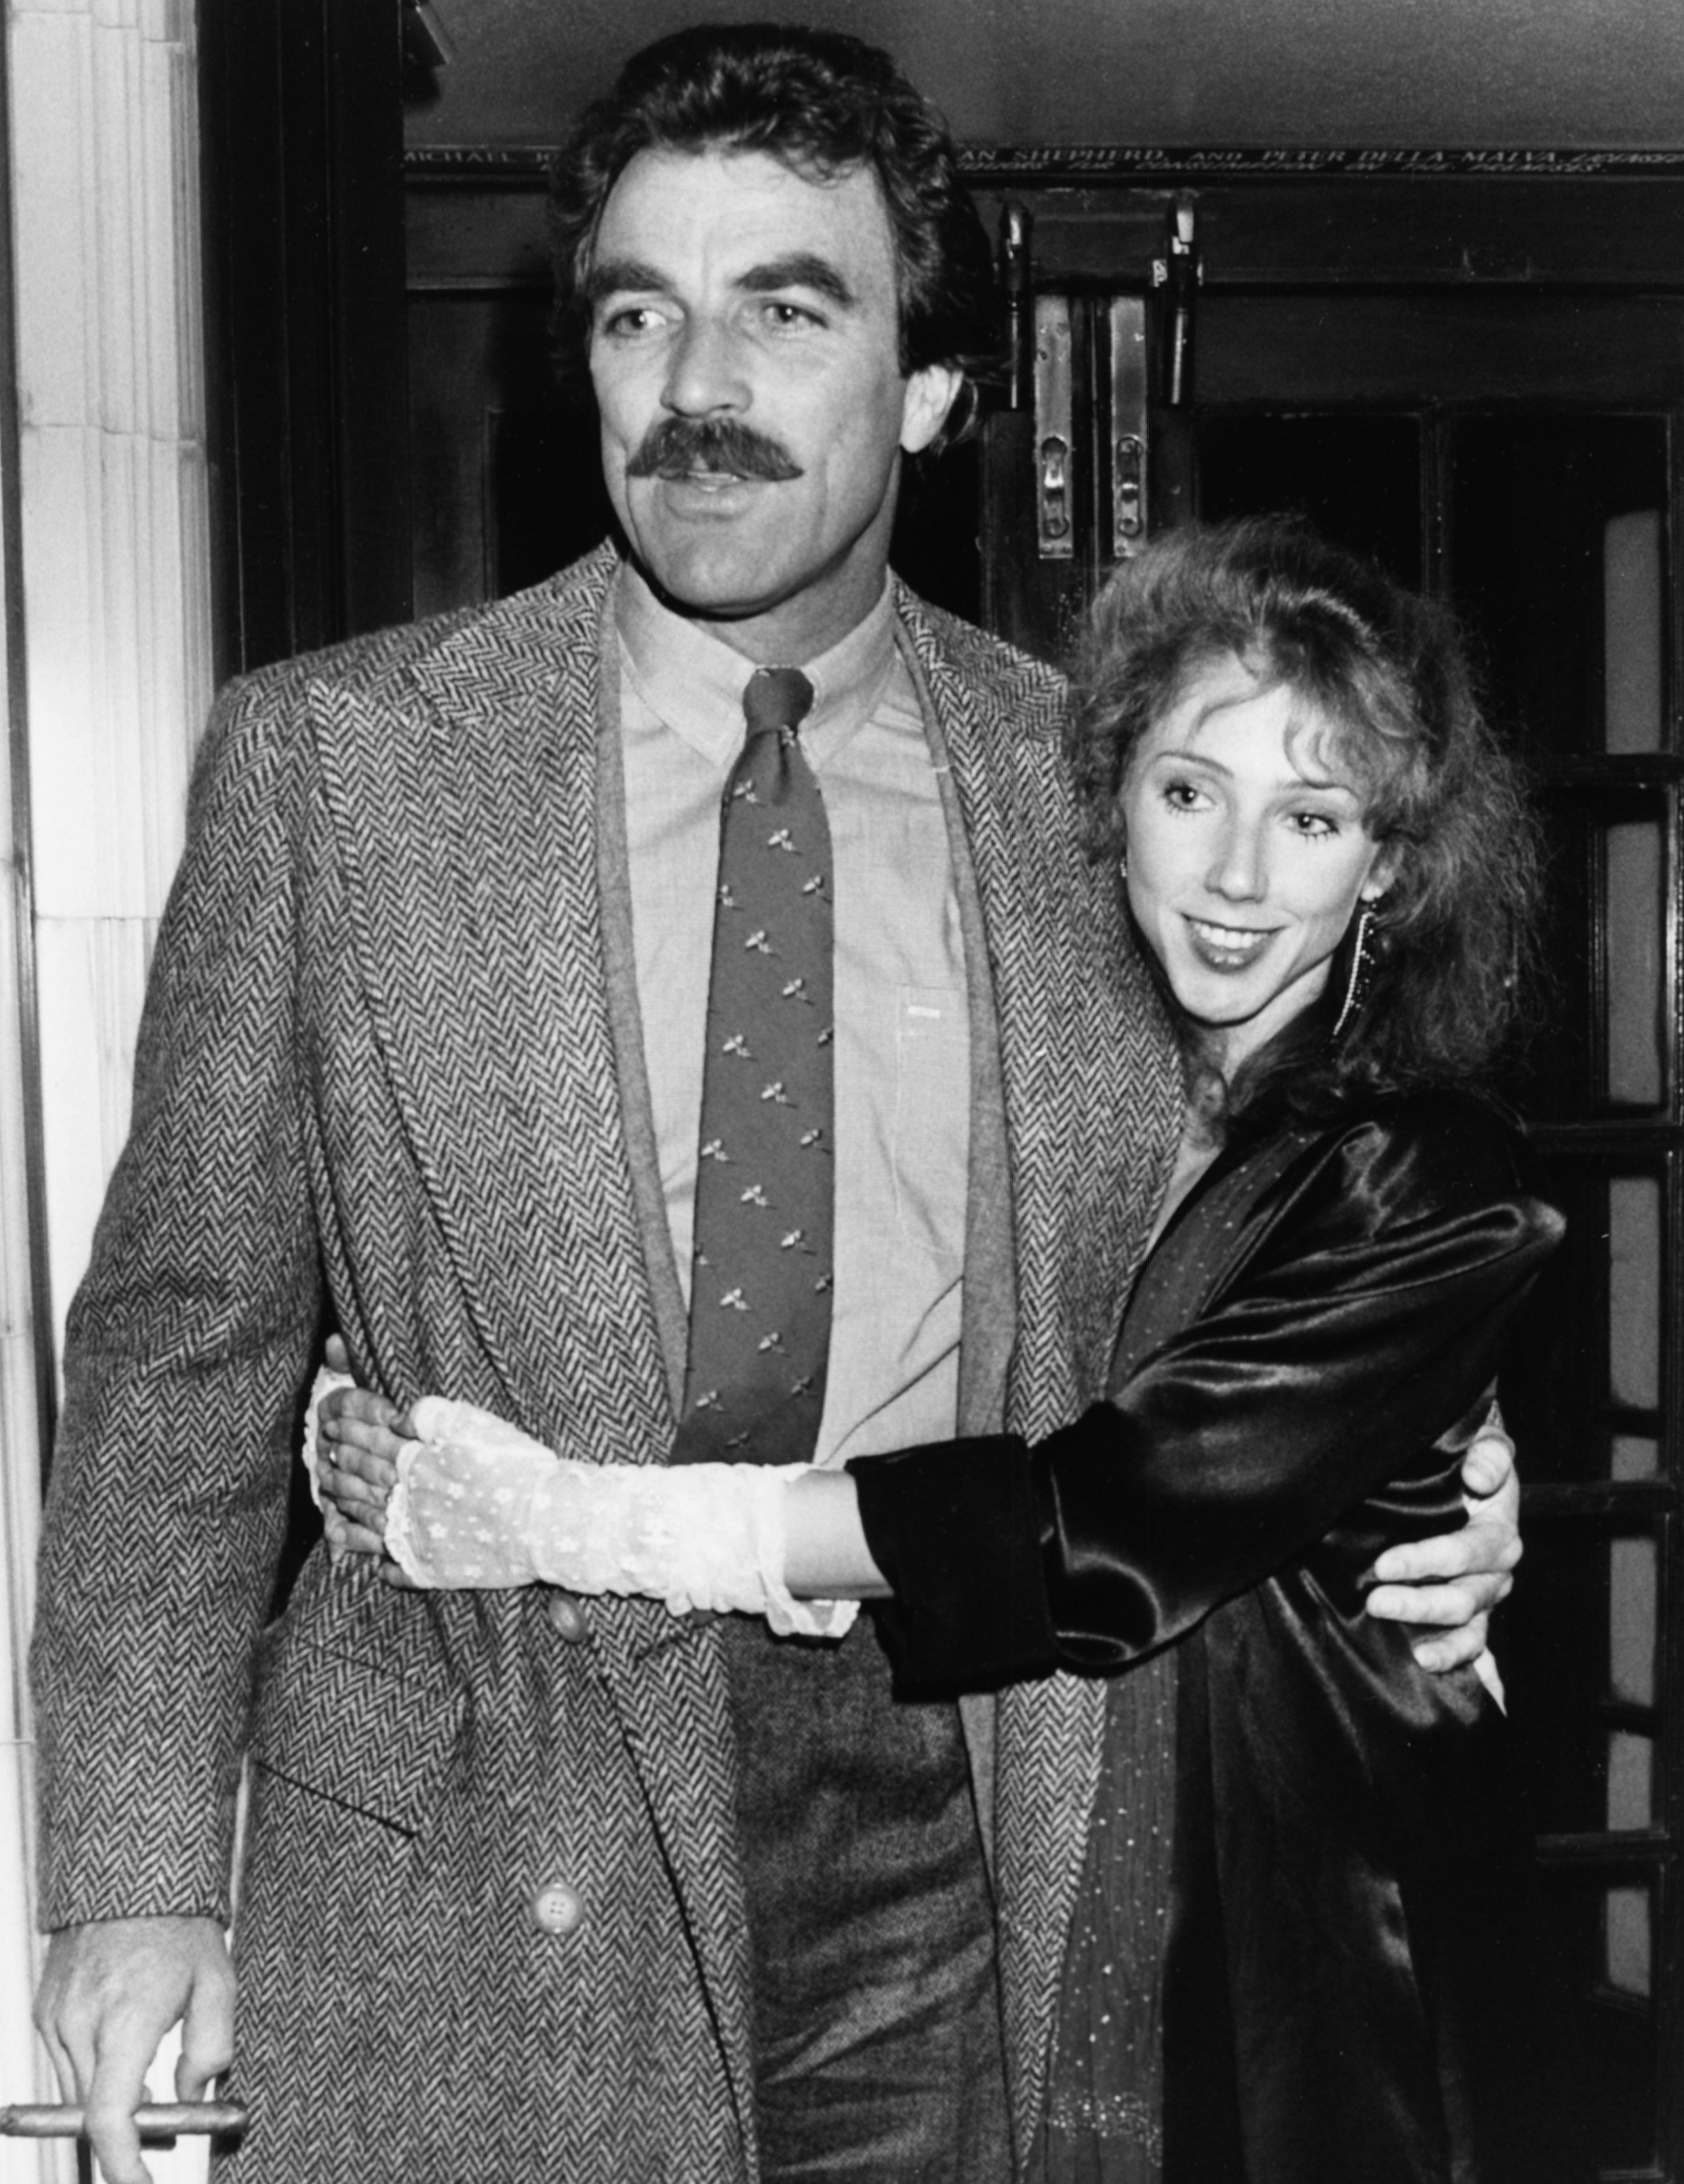 Tom Selleck and Jilly Mack leaving Langan's restaurant in London, April 29th 1985. | Source: Getty Images